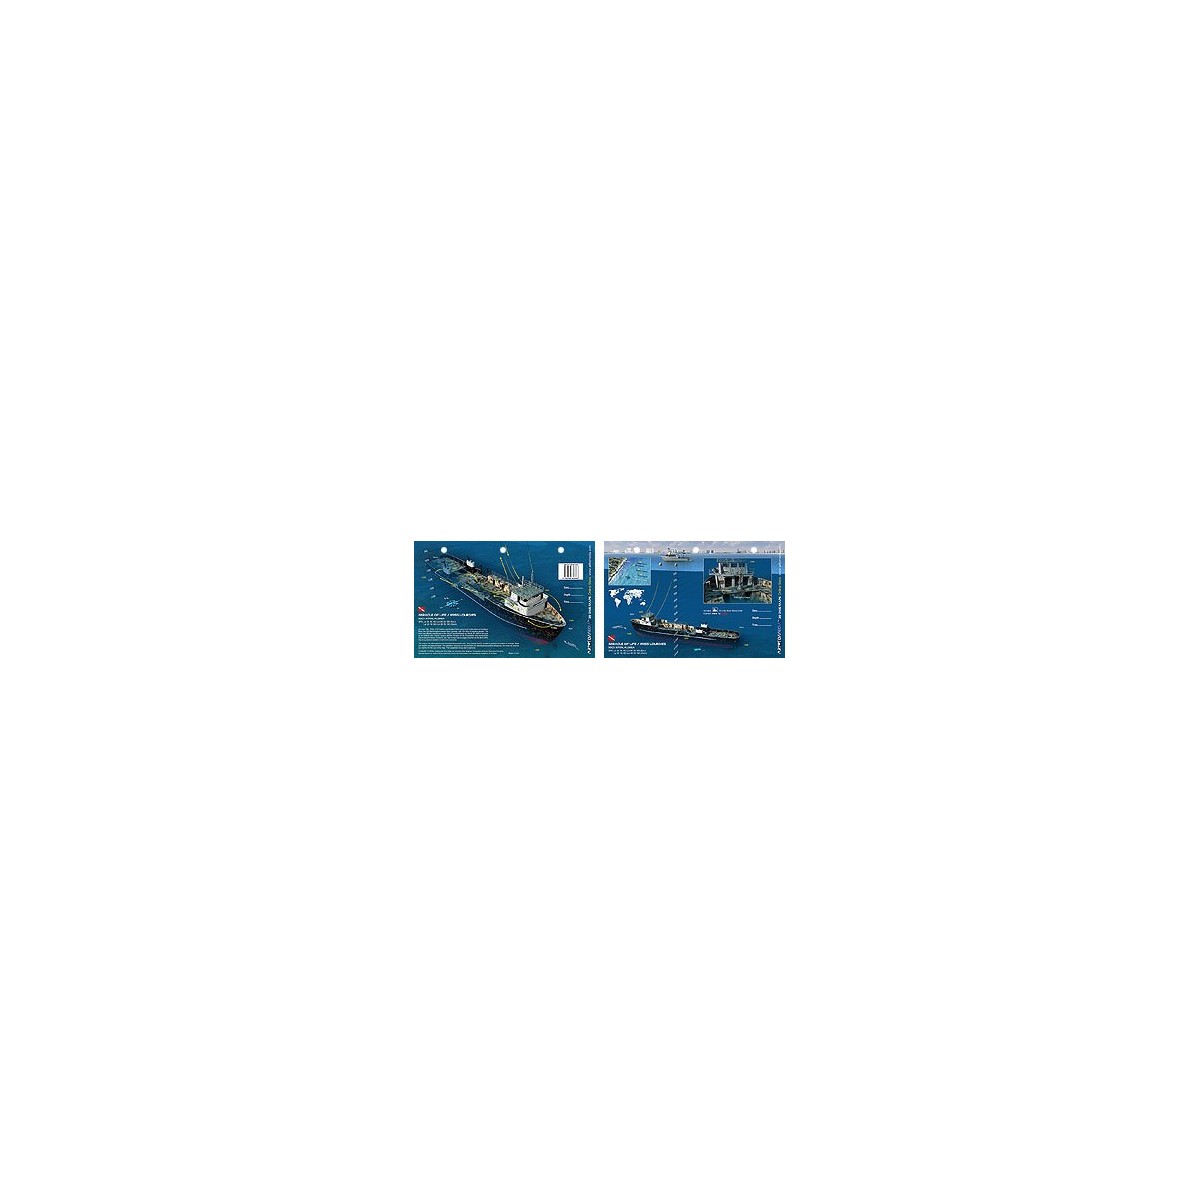 Miracle of Life in Fort Lauderdale, Florida (8.5 x 5.5 Inches) - New Art to Media Underwater Waterproof 3D Dive Site Map